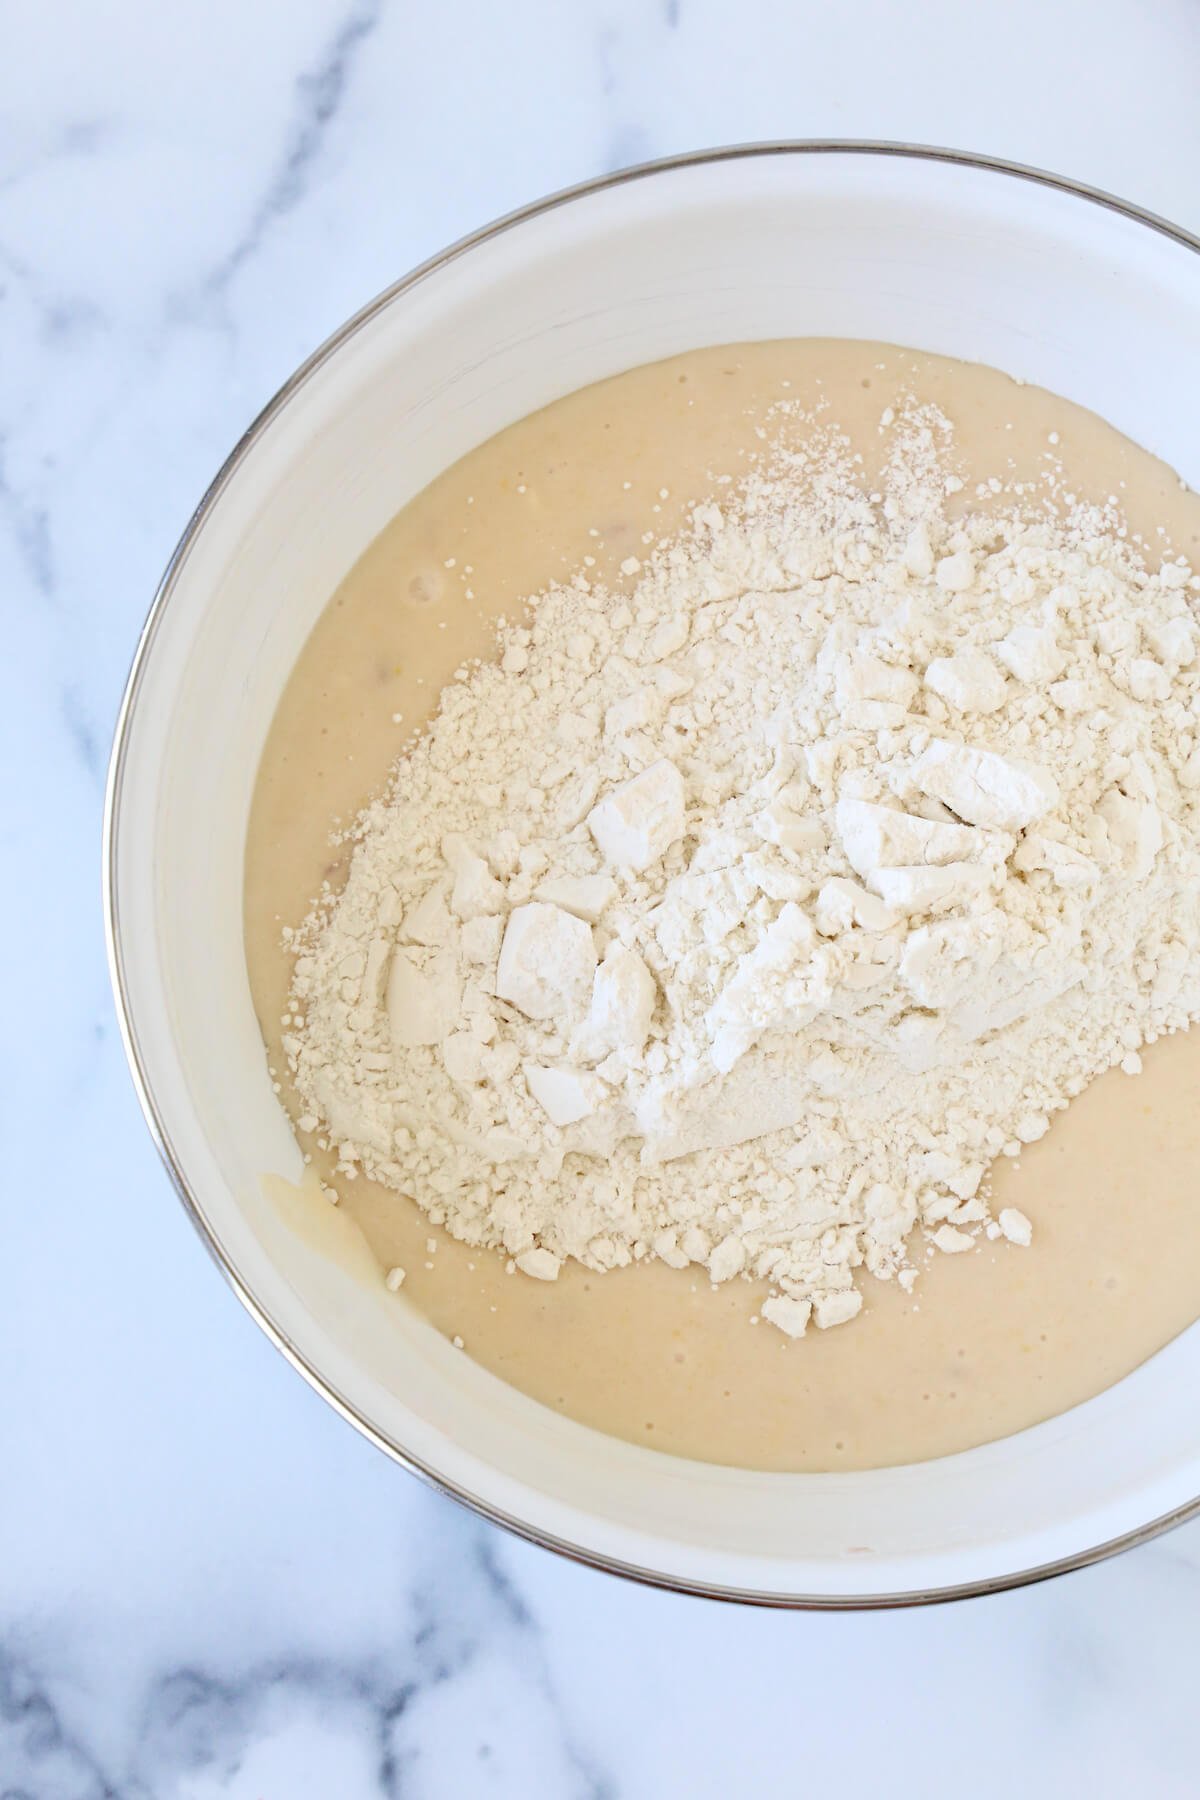 Batter in a bowl with flour on top.  